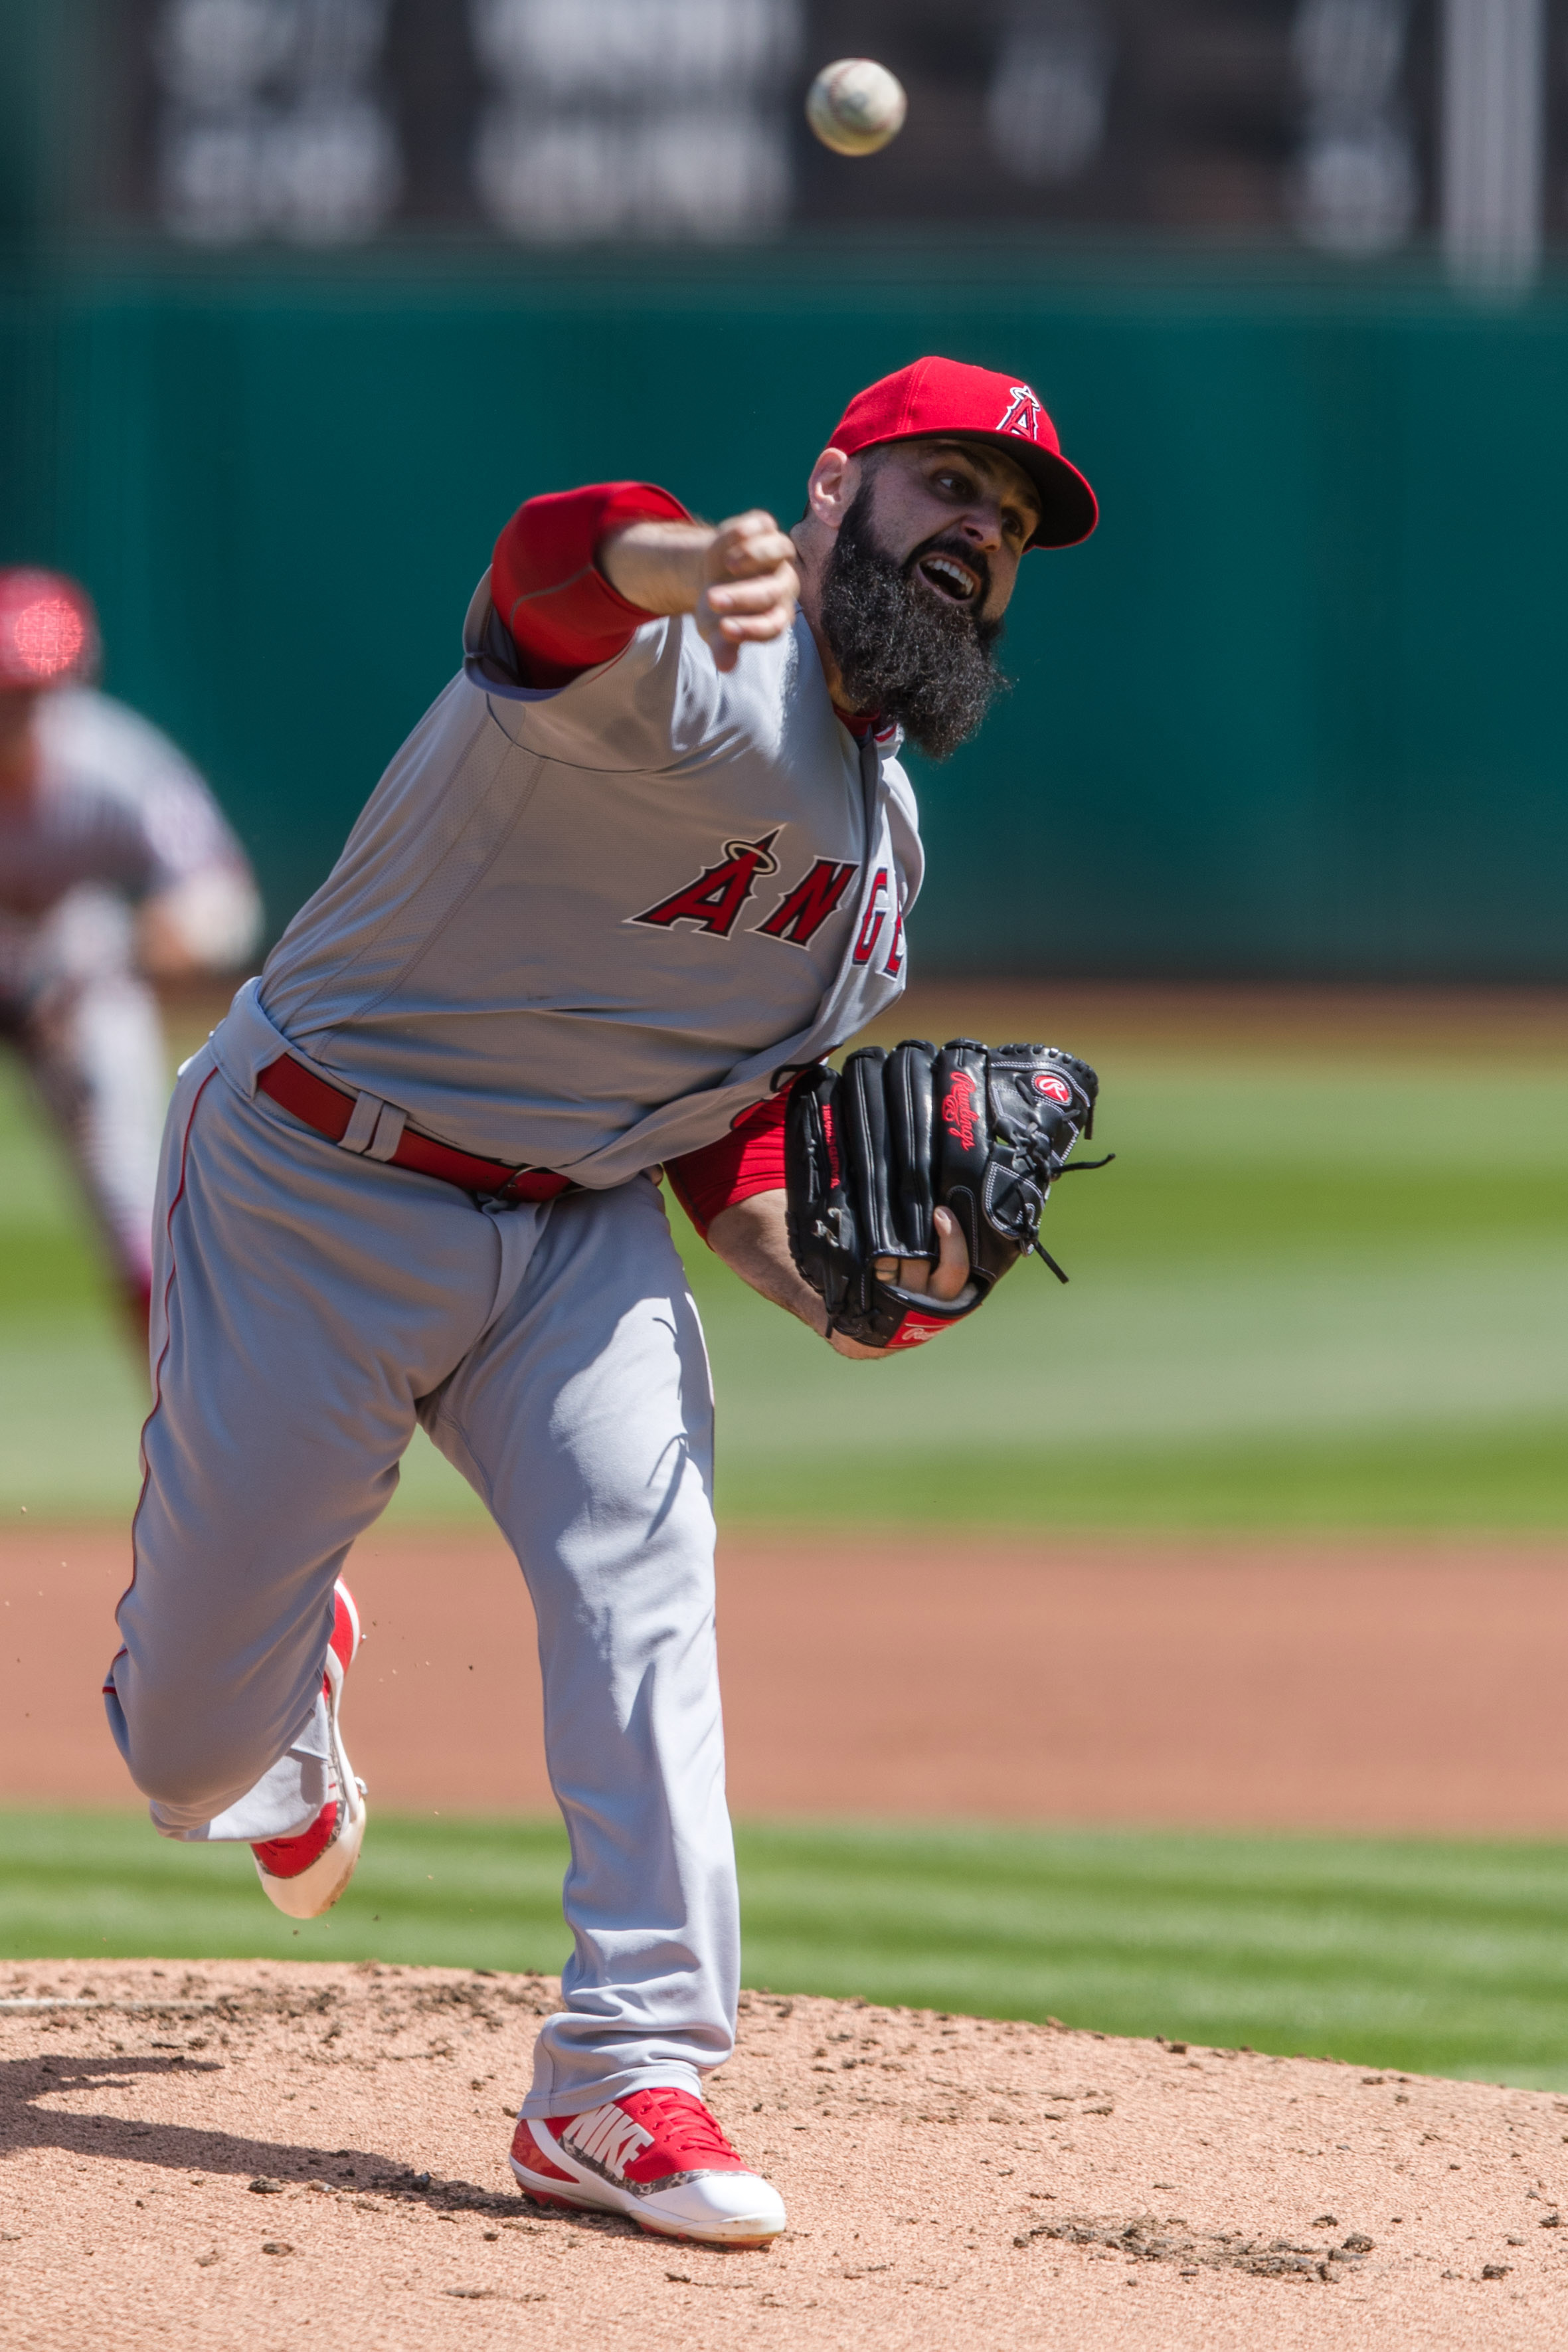 MLB trade rumors: Josh Harrison is a nice late addition for the